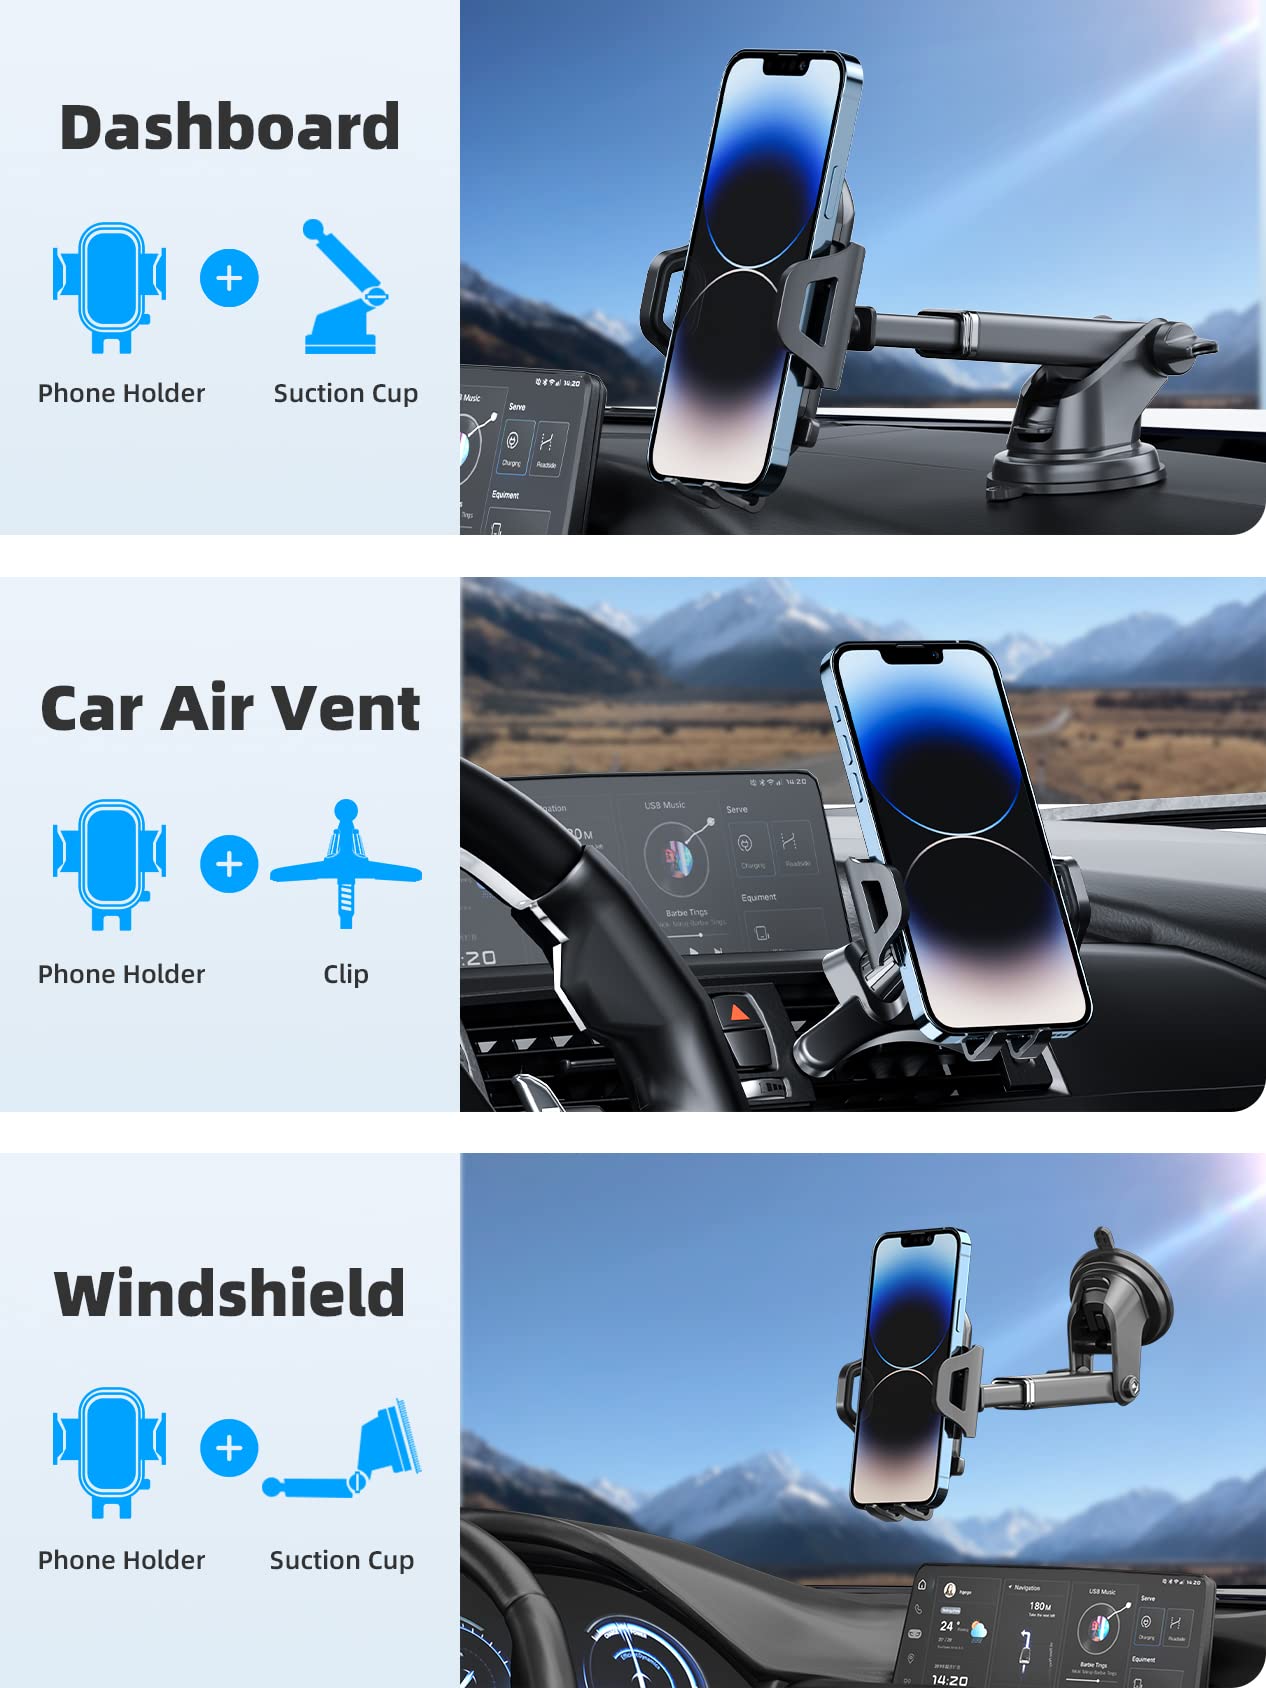 Phone Mount for Car [ Off-Road Level & Stable Hook ] Car Phone Holder Mount Windshield Dashboard Air Vent Universal Hands-Free Automobile Mounts Cell Phone Holder Fit for iPhone Smartphones